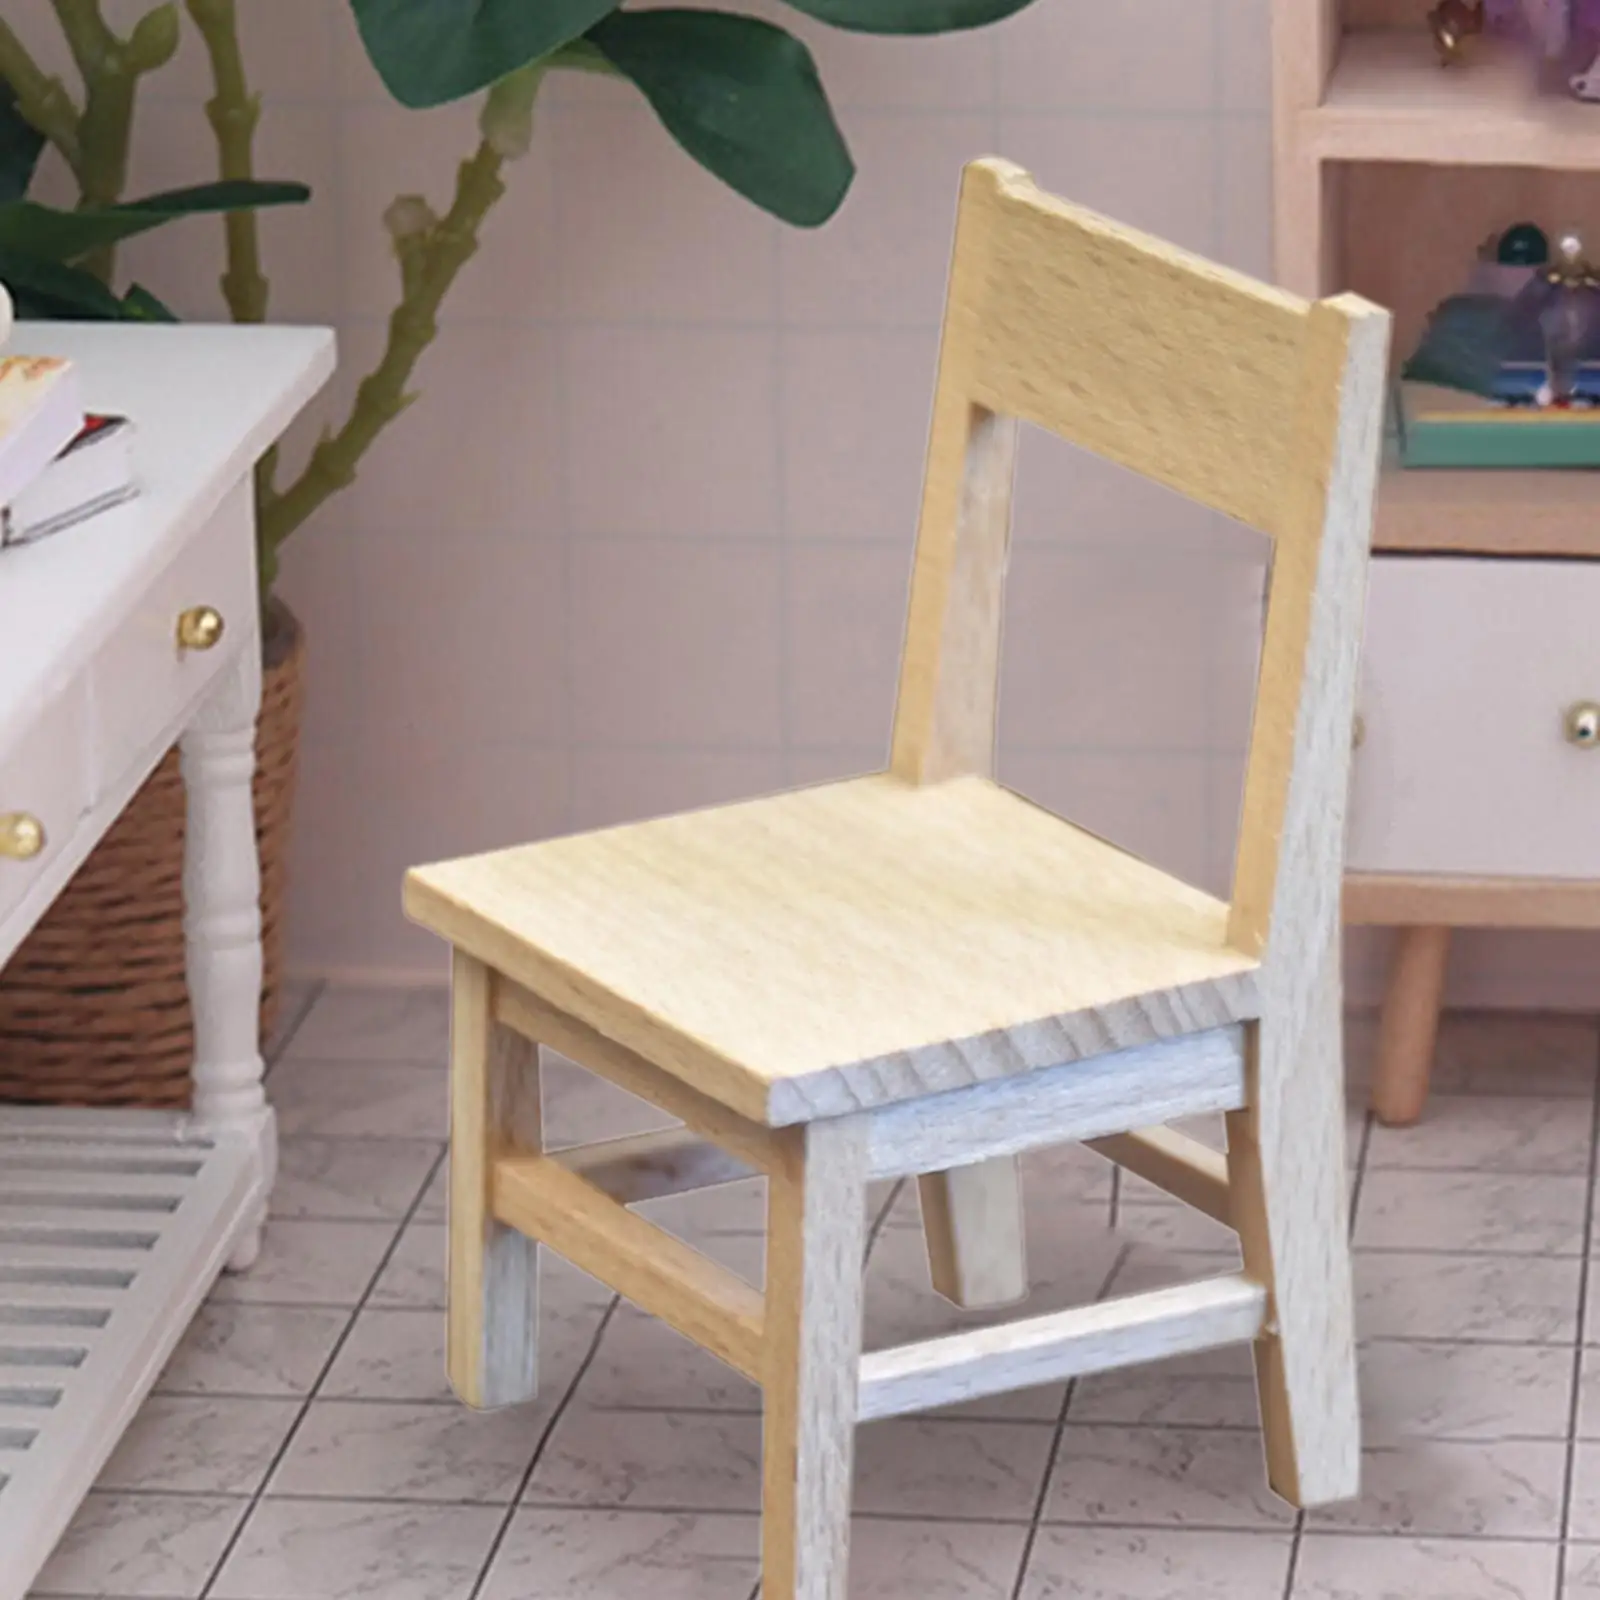 Mini Wooden Chair Doll House Furnishing Handmade DIY Craft Miniature Furniture 1/12 Scale Dollhouse Furniture for Photo Props